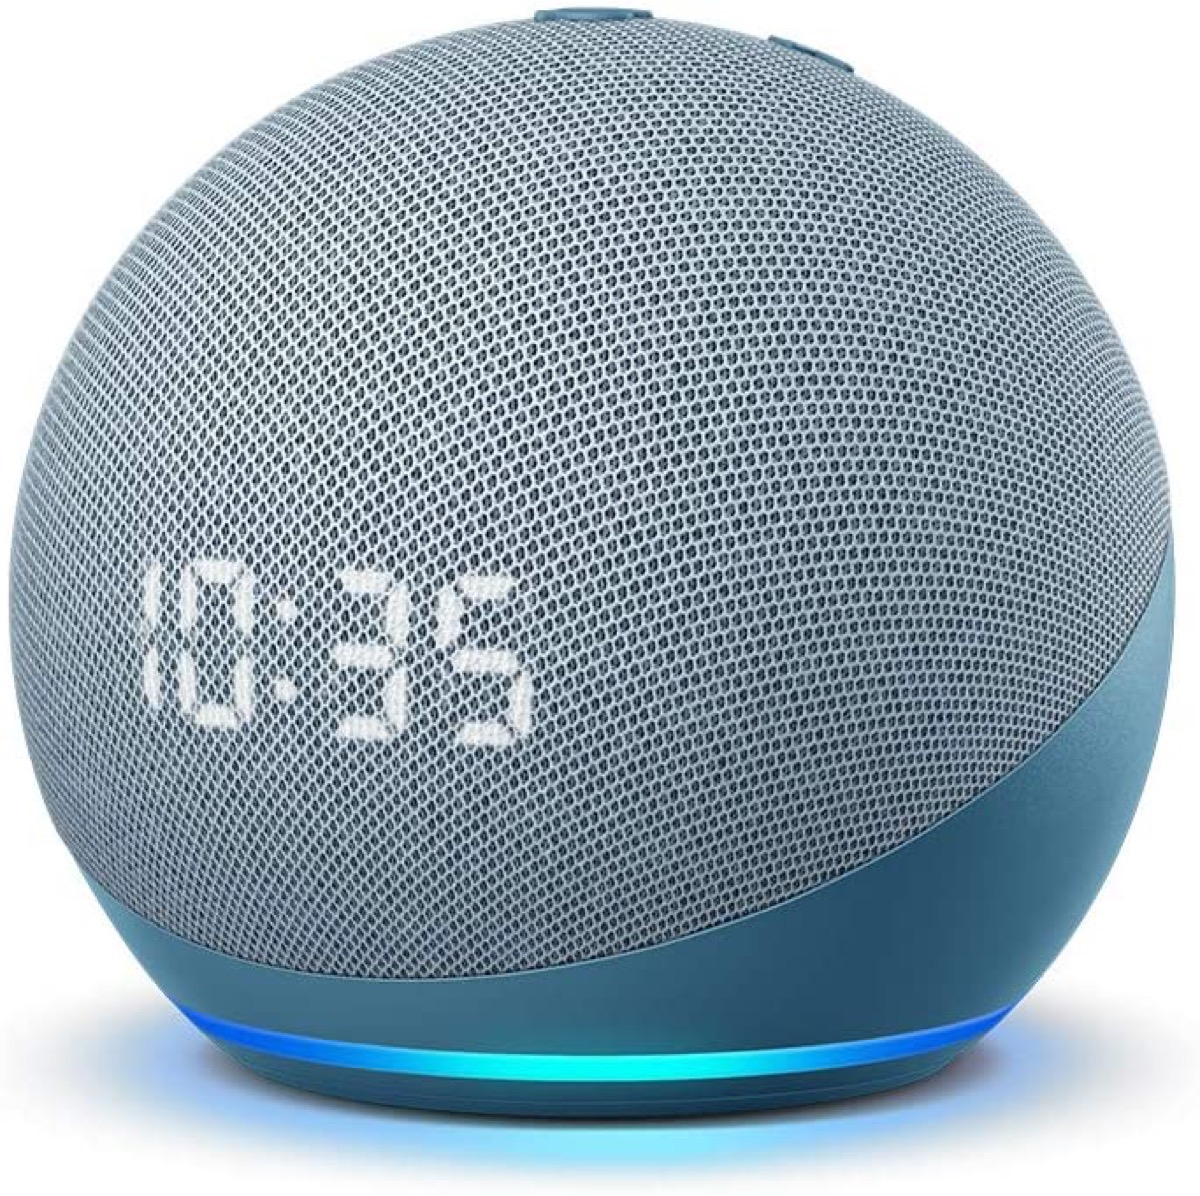 gray echo dot smart home device displaying 10:35 time